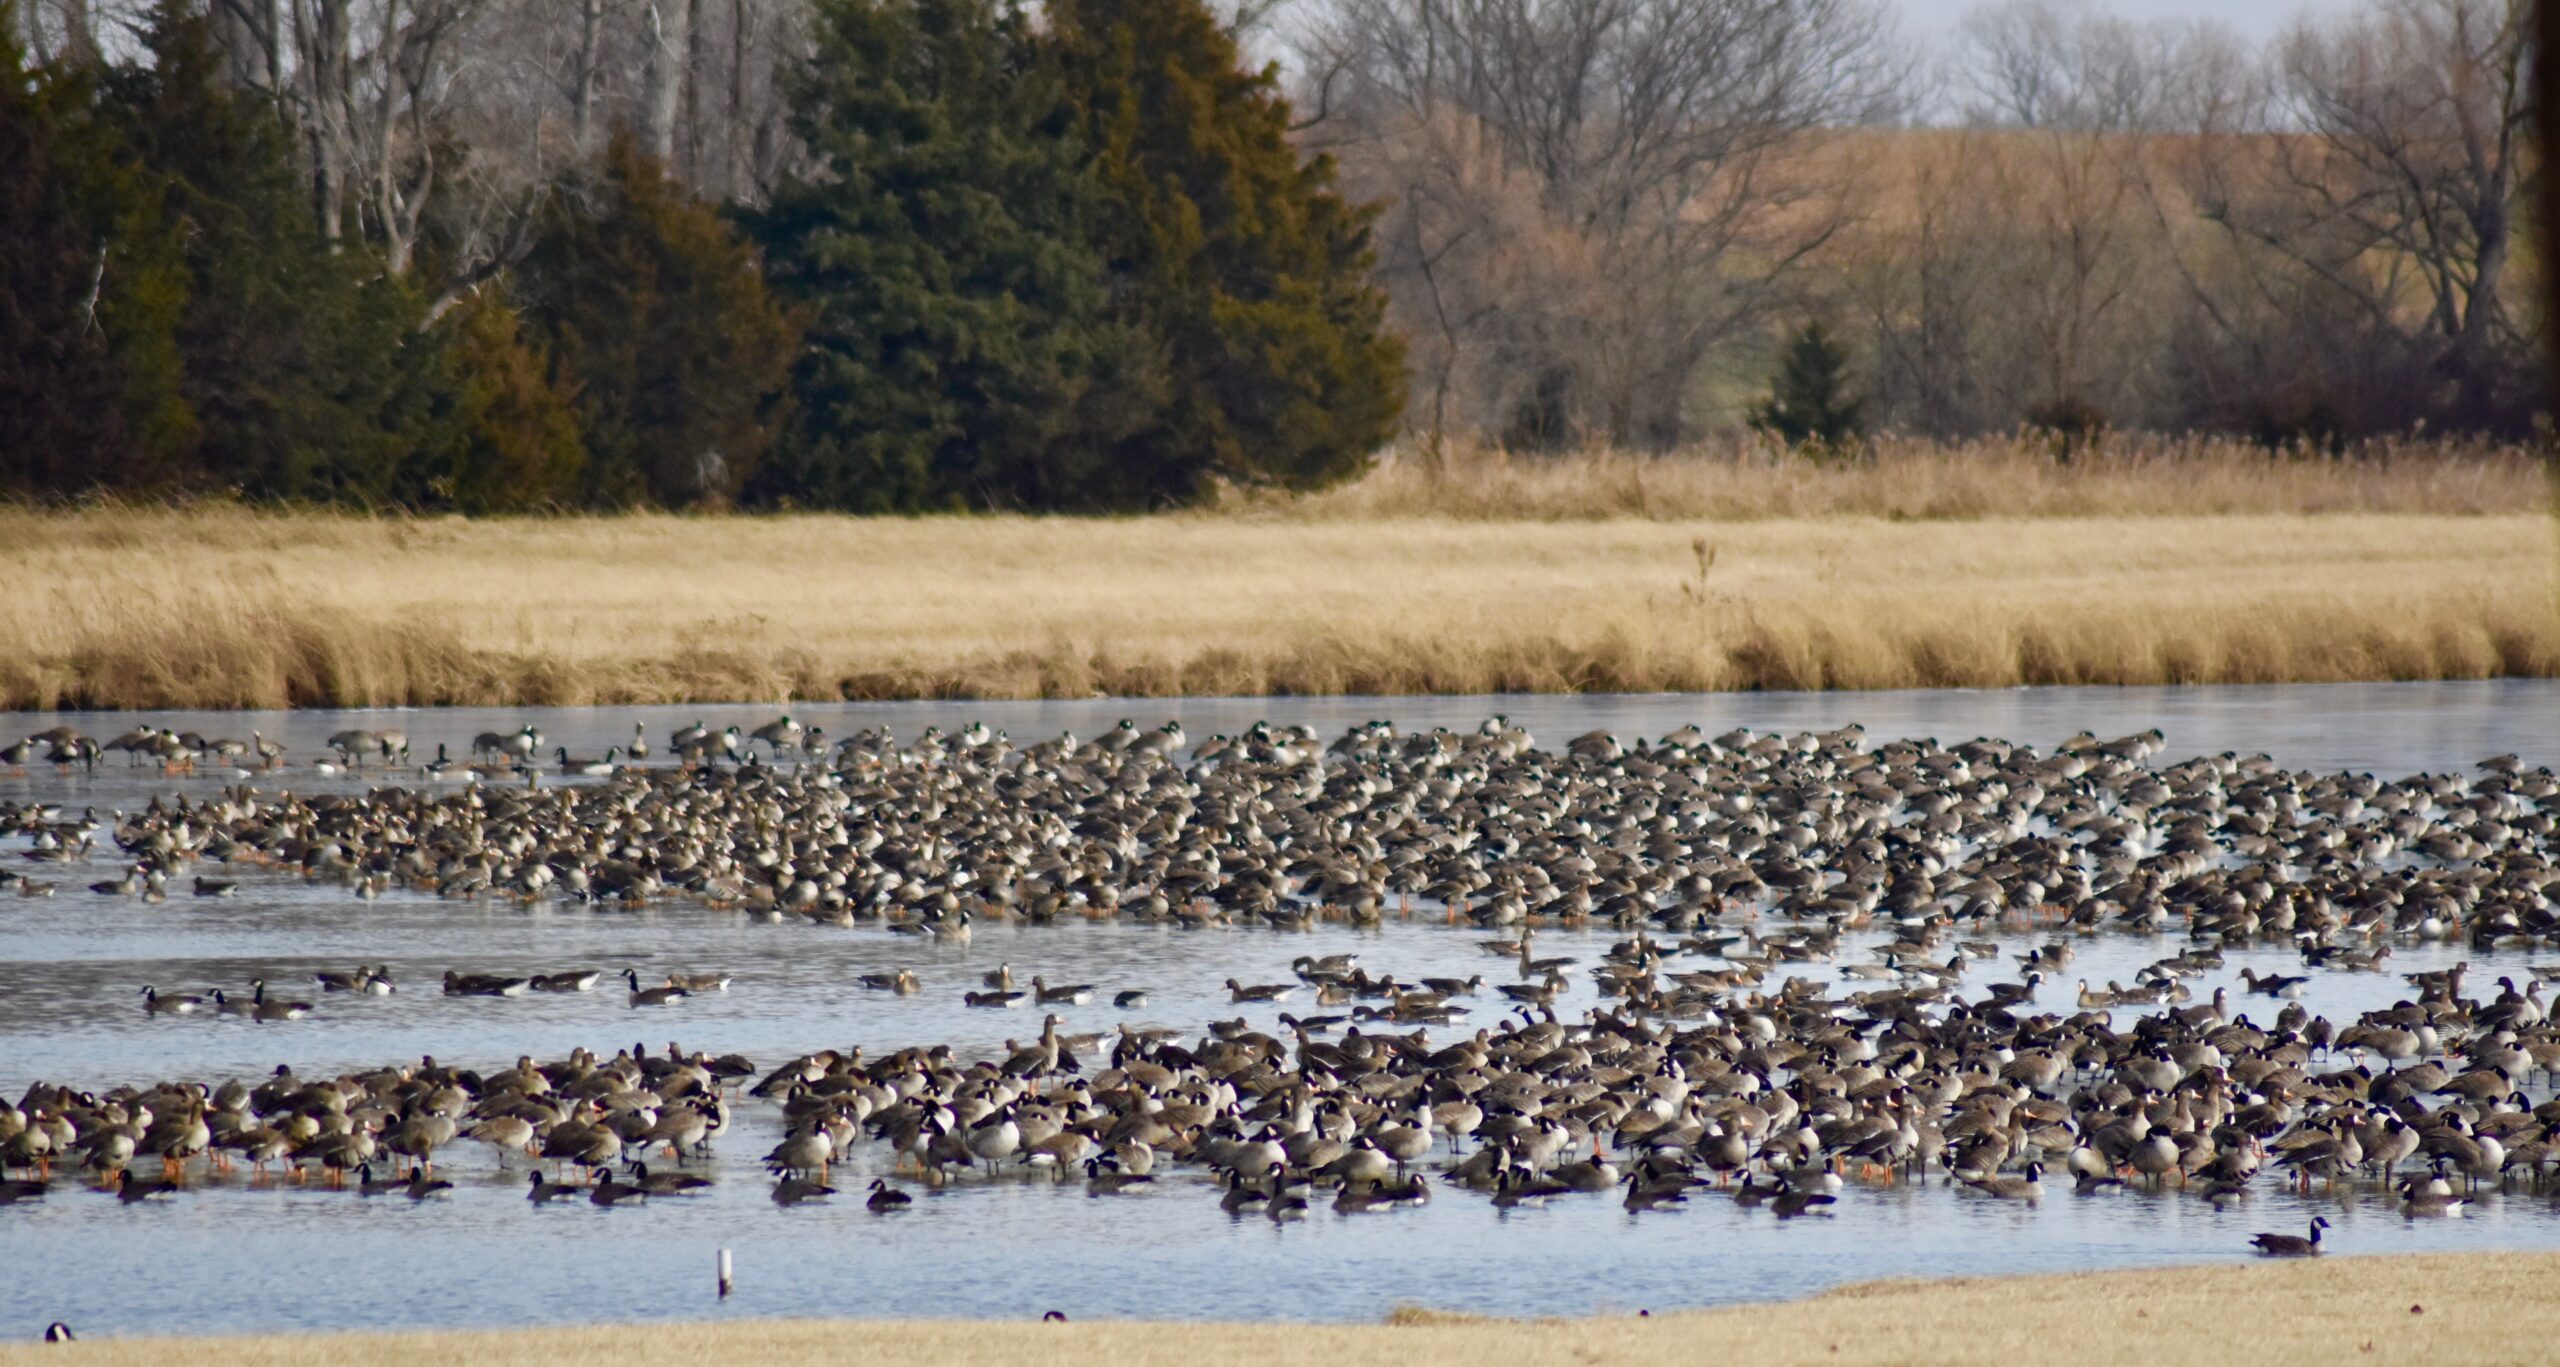 Having open water after a hard freeze will attract geese headed back north.